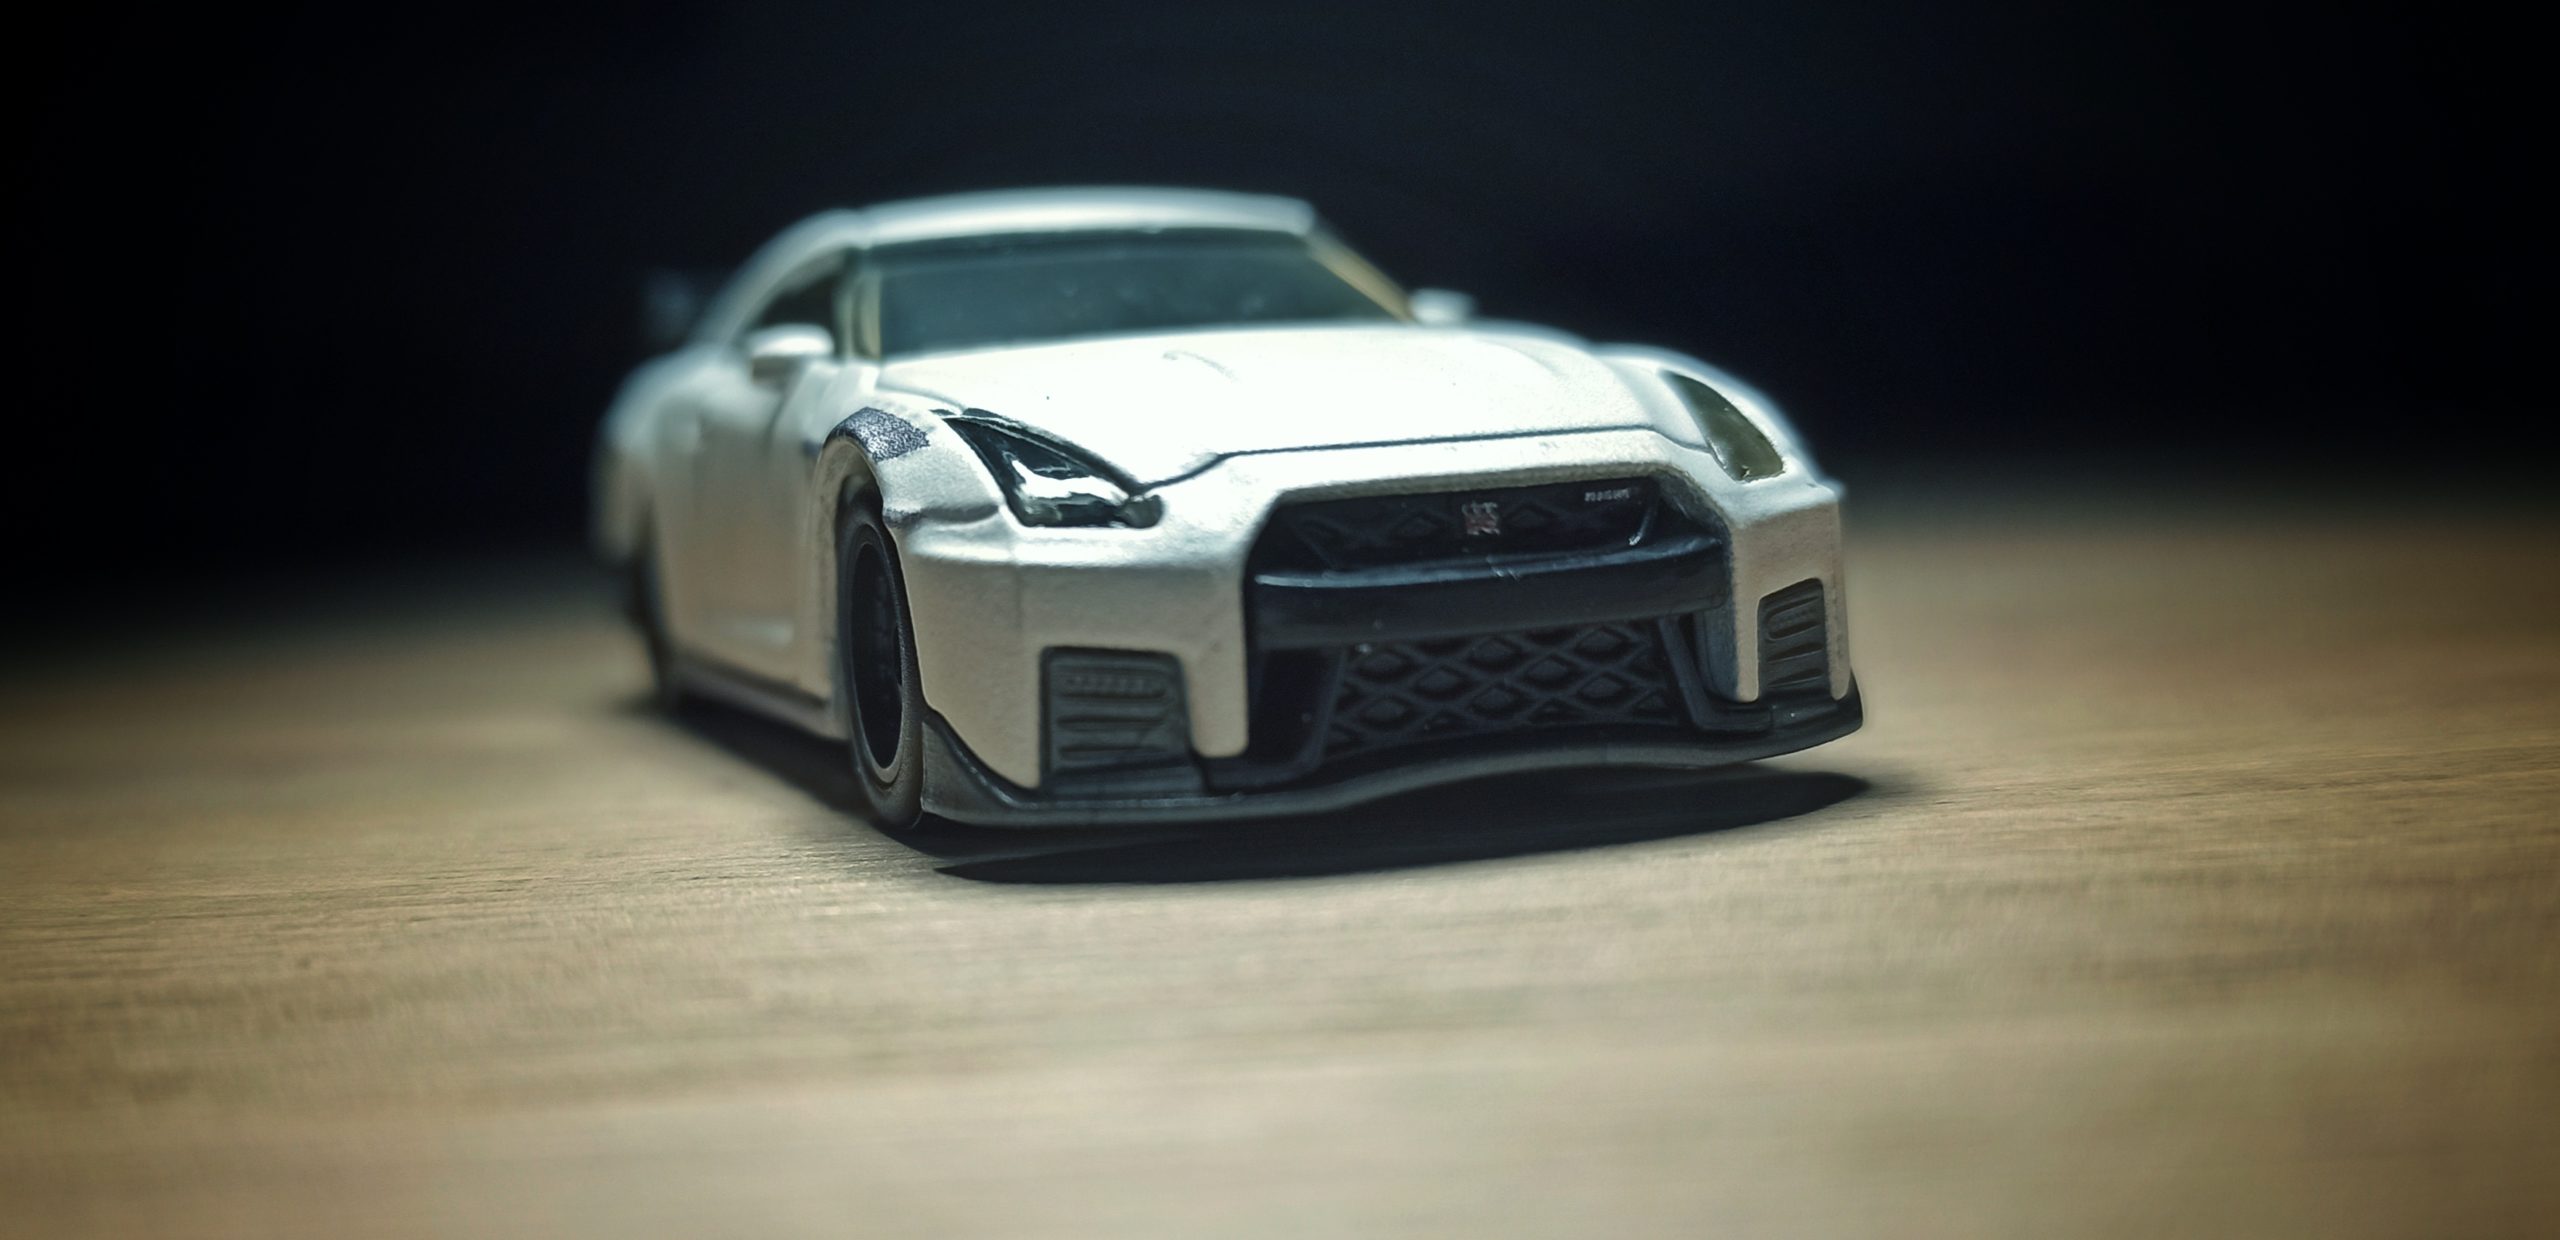 Matchbox Nissan GT-R NISMO (MB1258) 2021 MBX Collectors Series (18/20) white